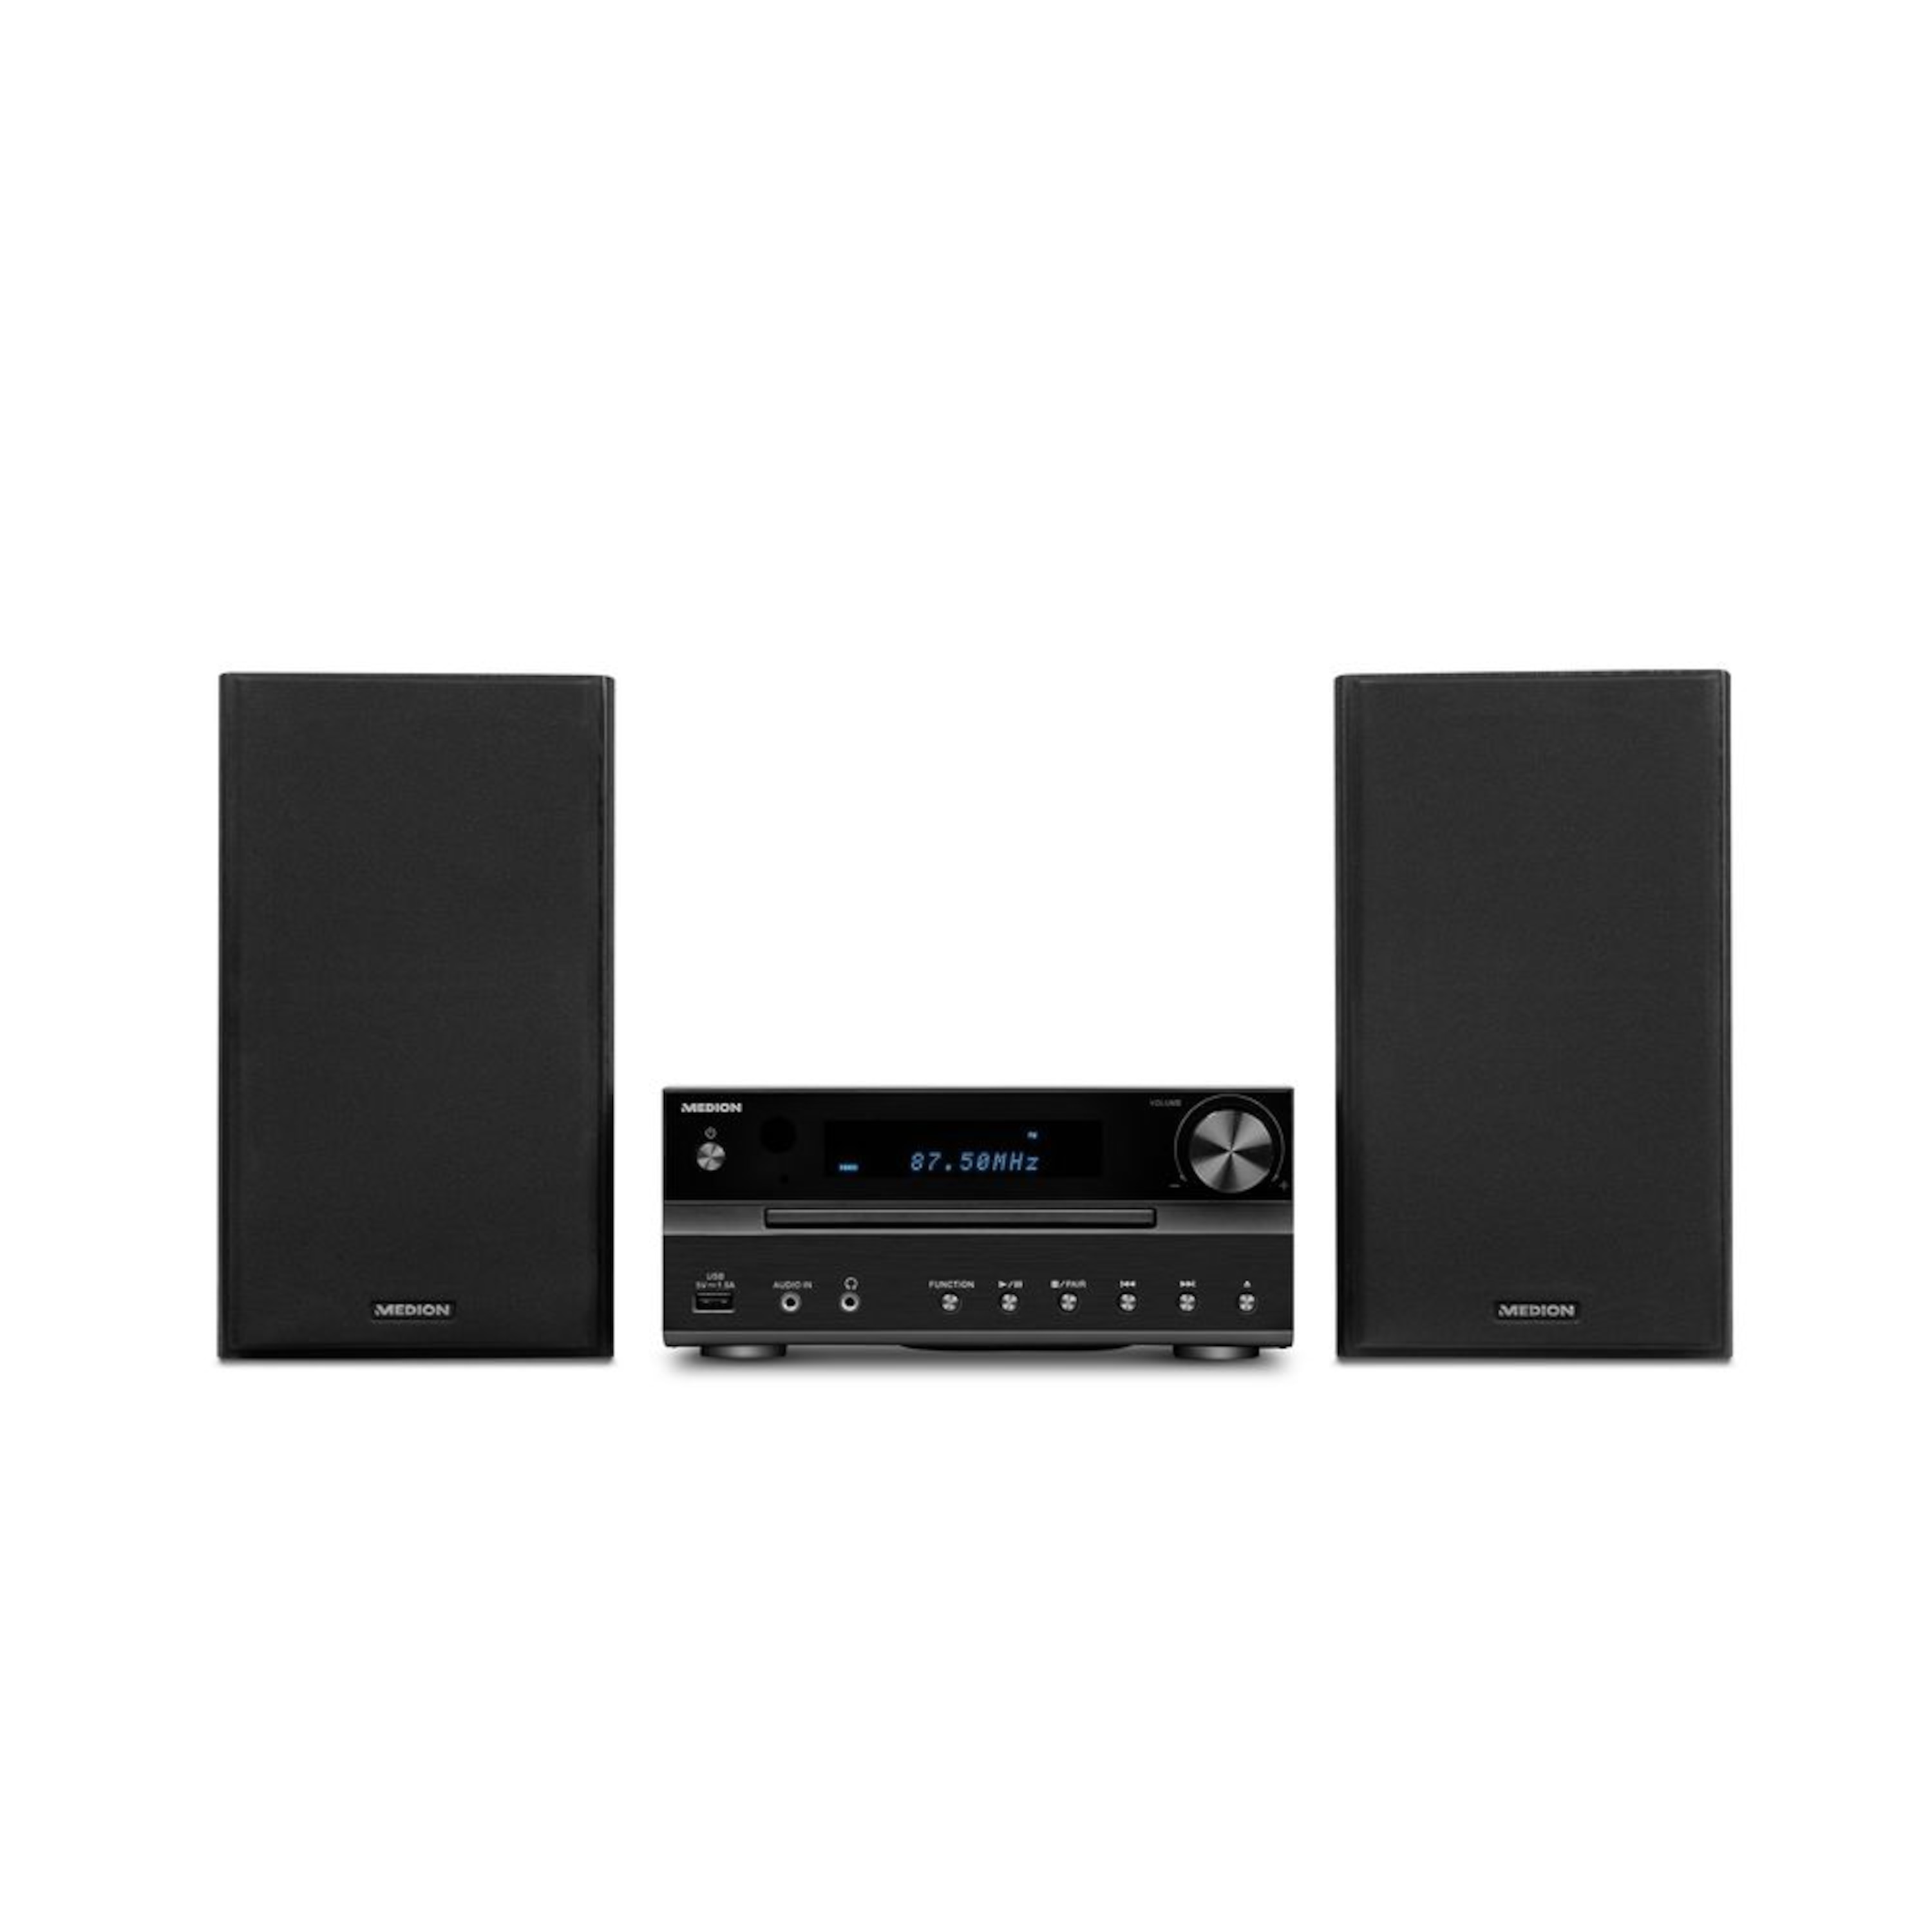 MEDION® LIFE® P64262 Micro-Audio-System mit CD-Player, DAB+, Bluetooth 3.0, USB-Anschluss & -Ladefunktion, AUX-Anschluss, PLL-UKW-Stereo-Radio, 2 x 15 W RMS  (B-Ware)